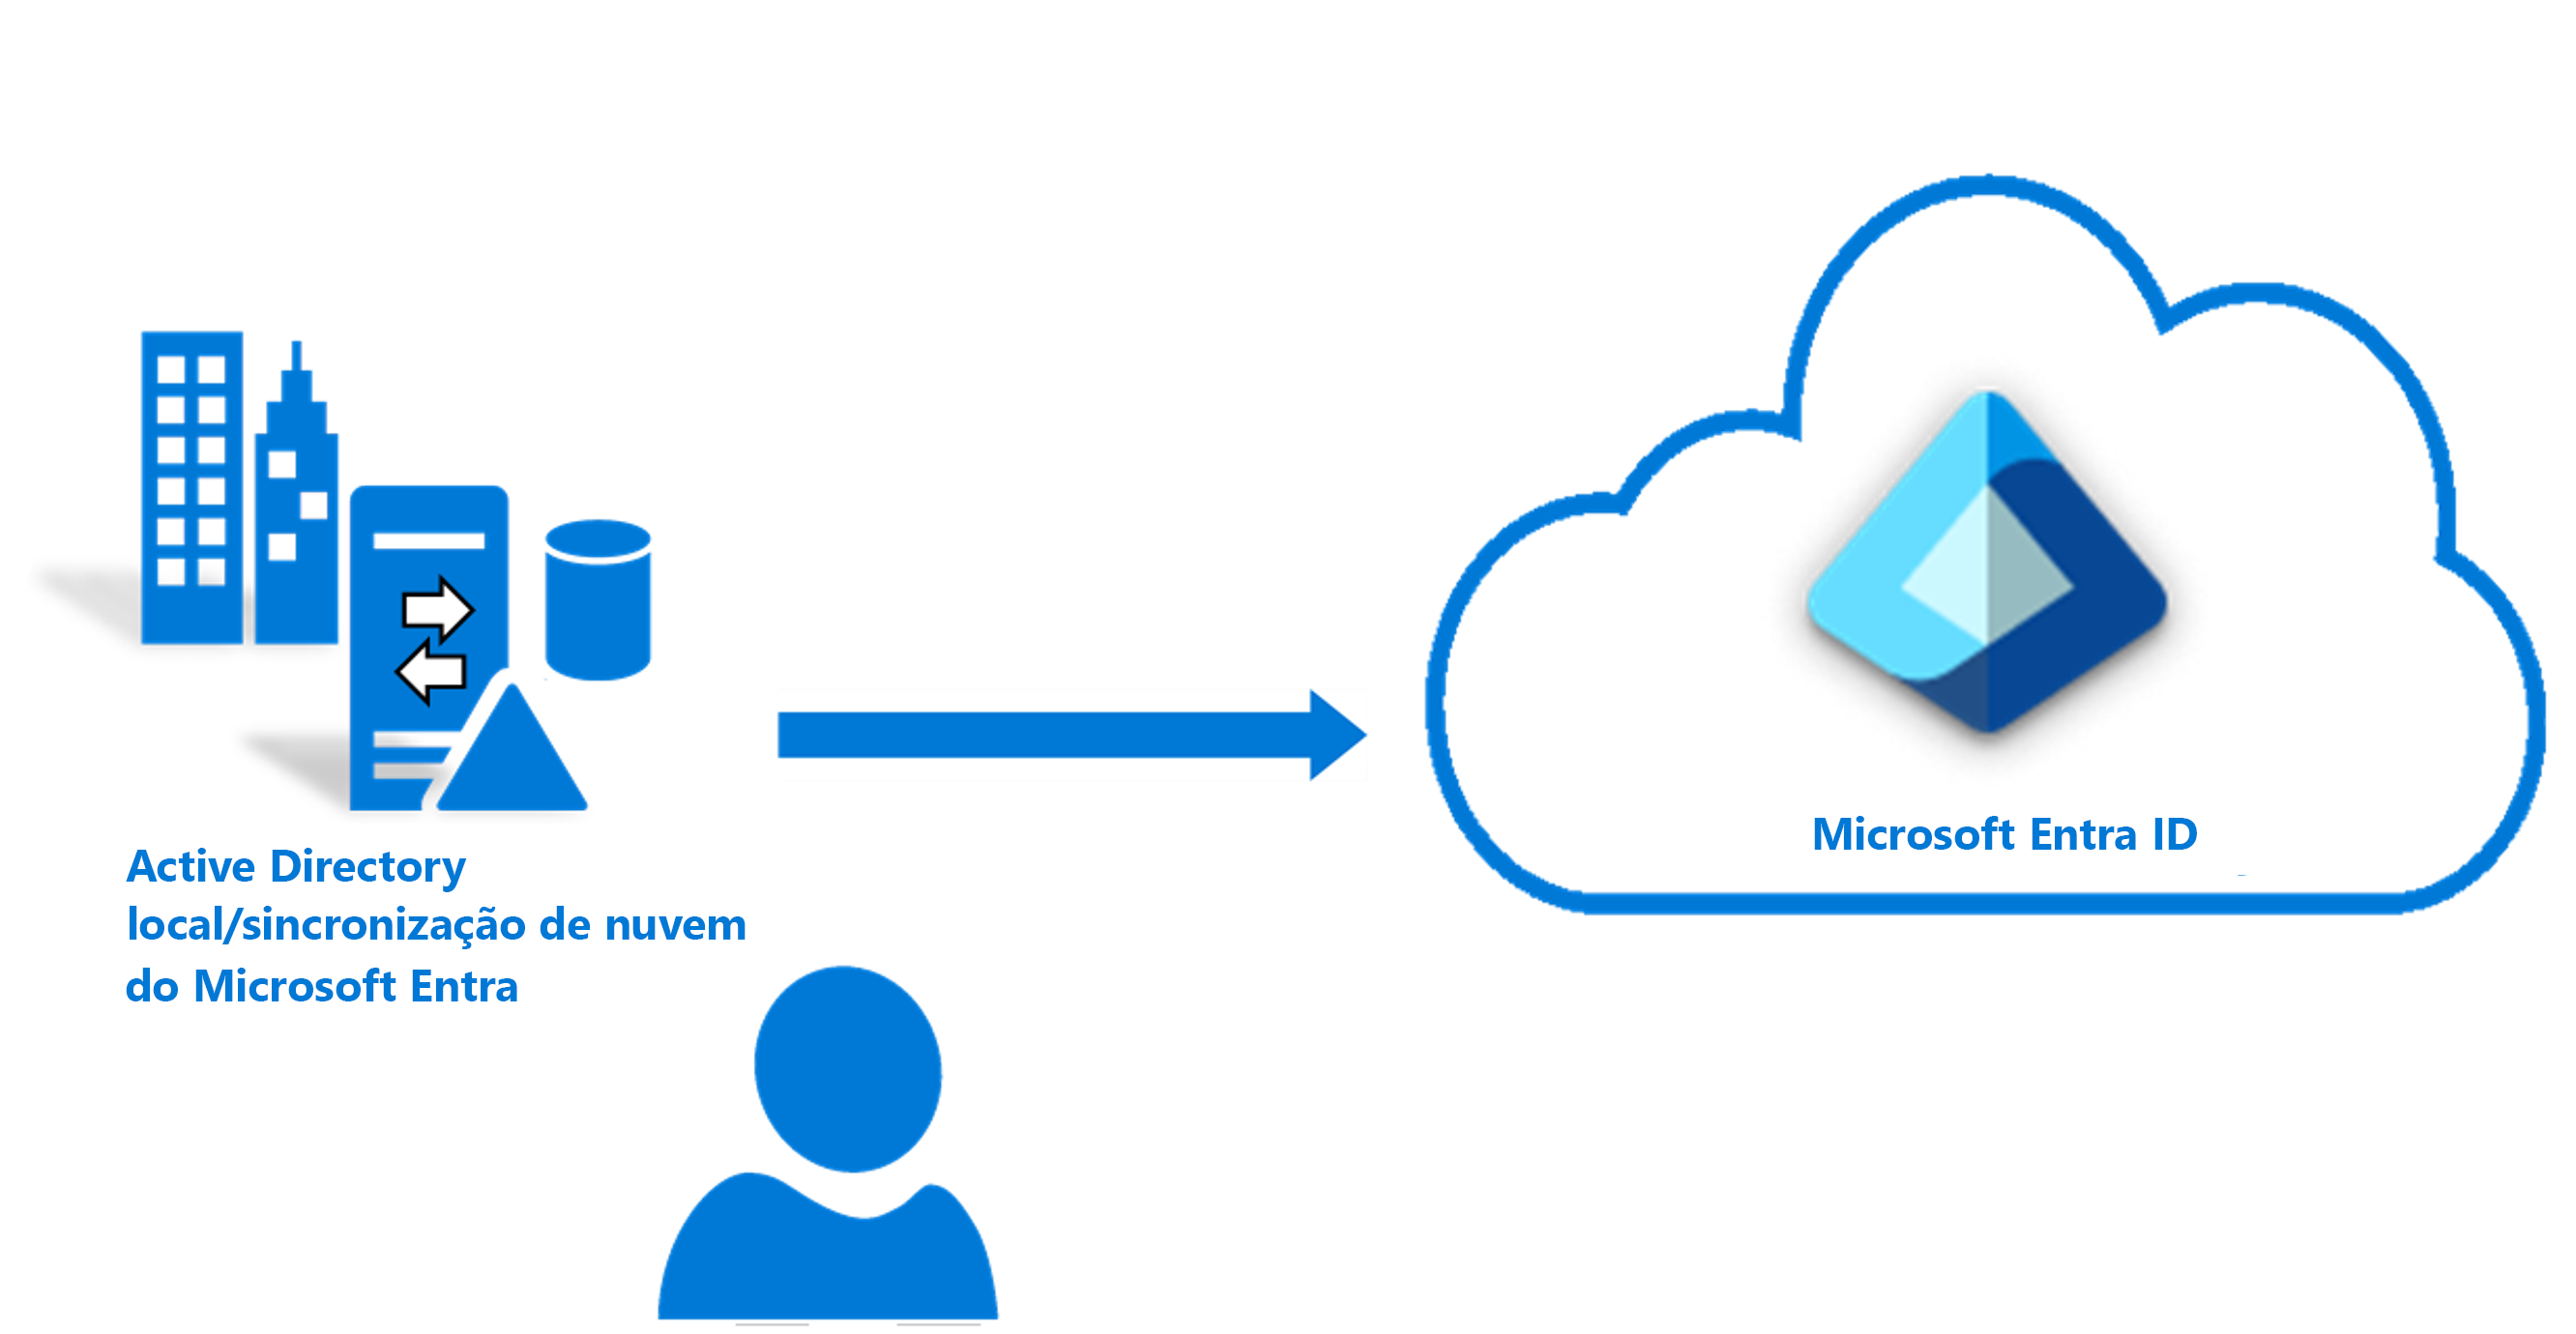 Illustration of a hybrid identity on an on-premises Active Directory with Microsoft Entra Cloud Sync pointing to the cloud-based Microsoft Entra ID.